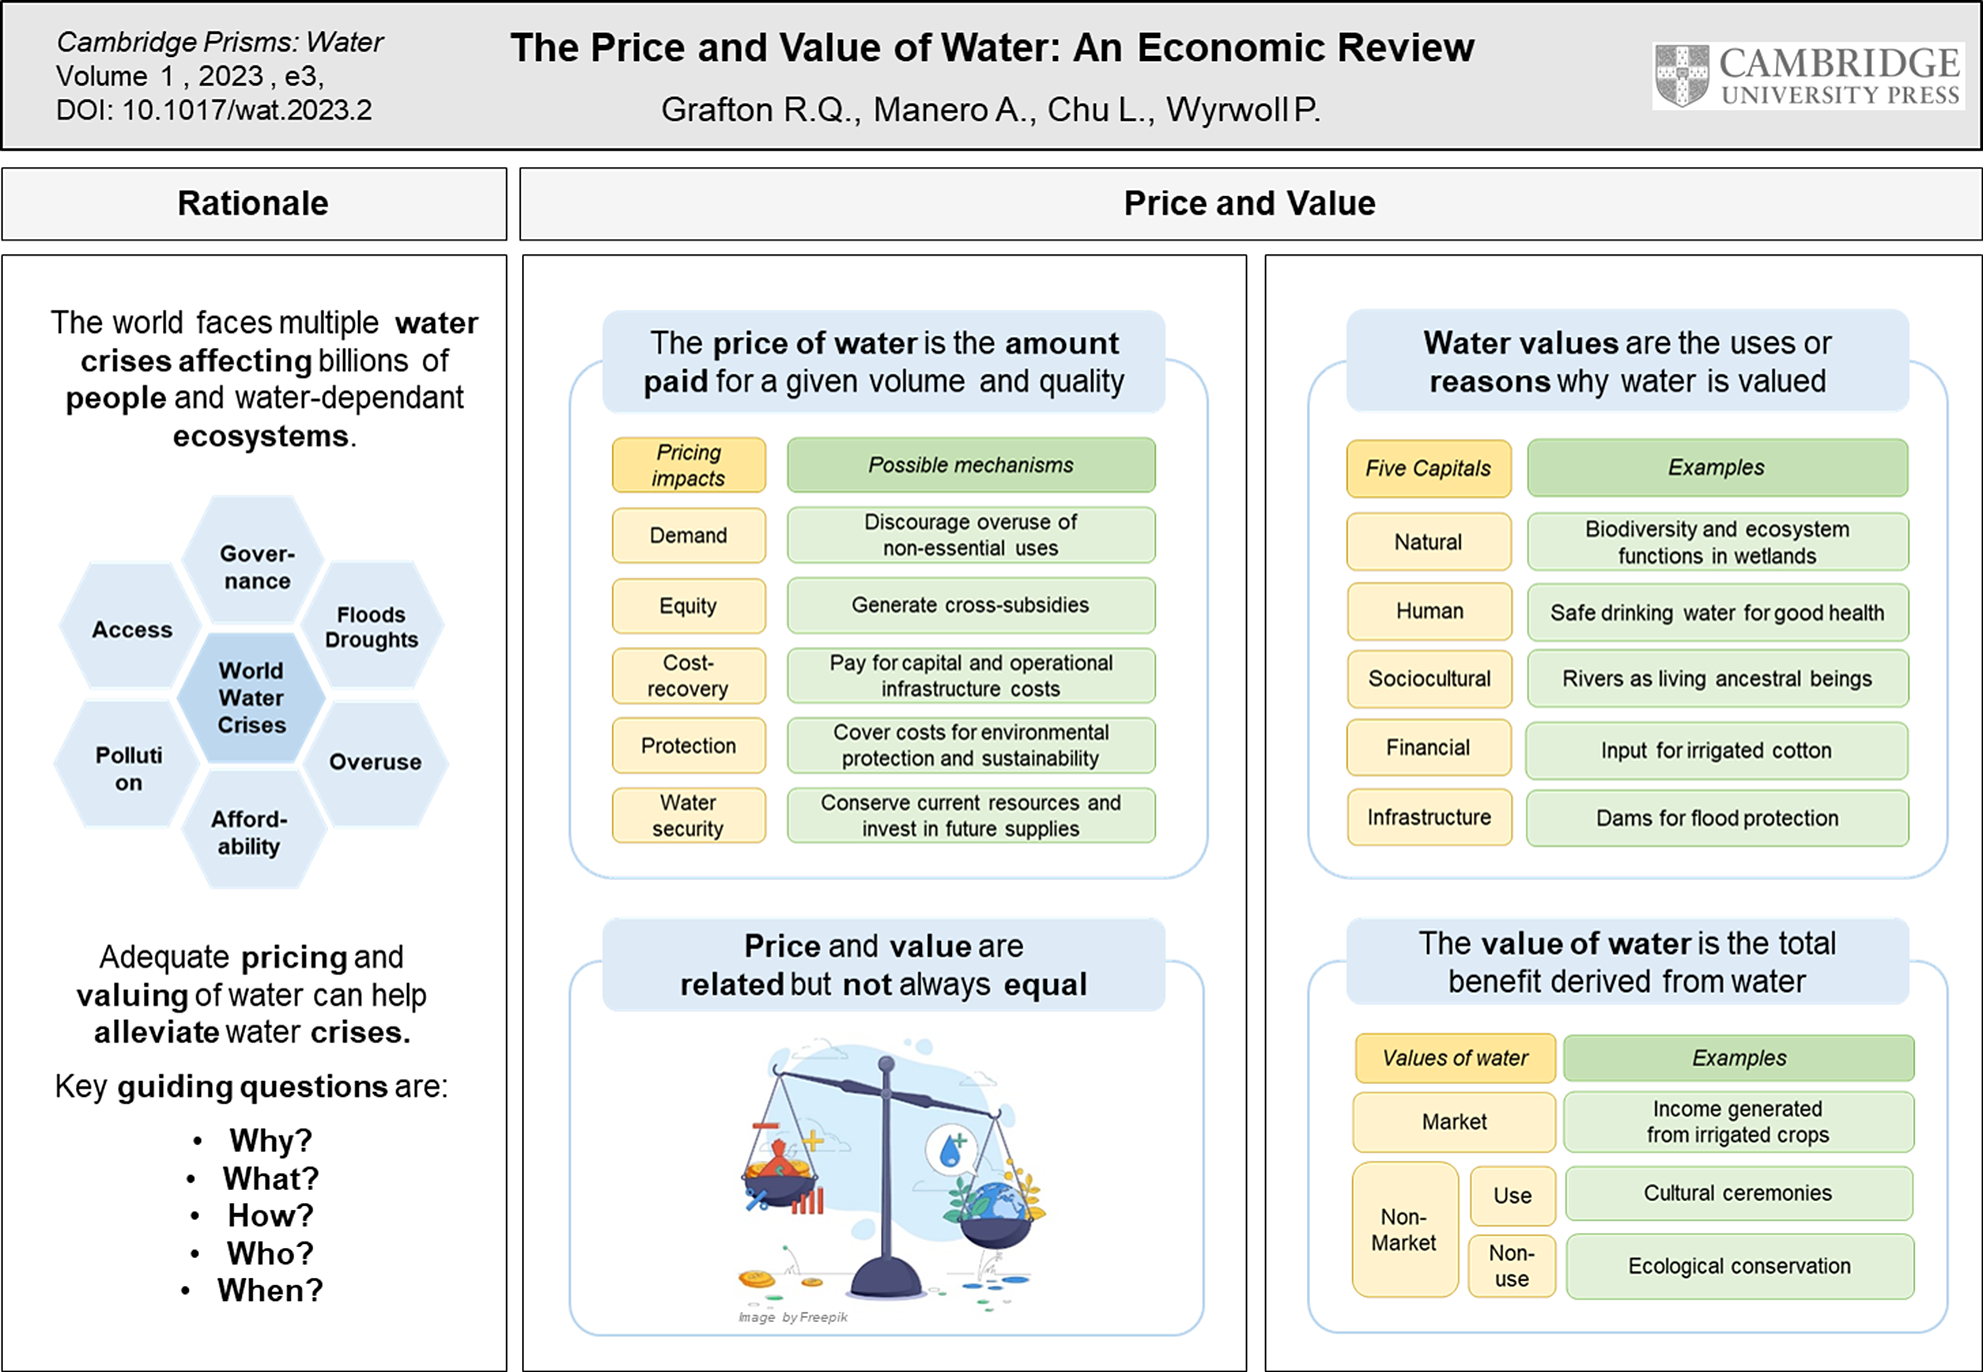 The price and value of water: An economic review   Cambridge